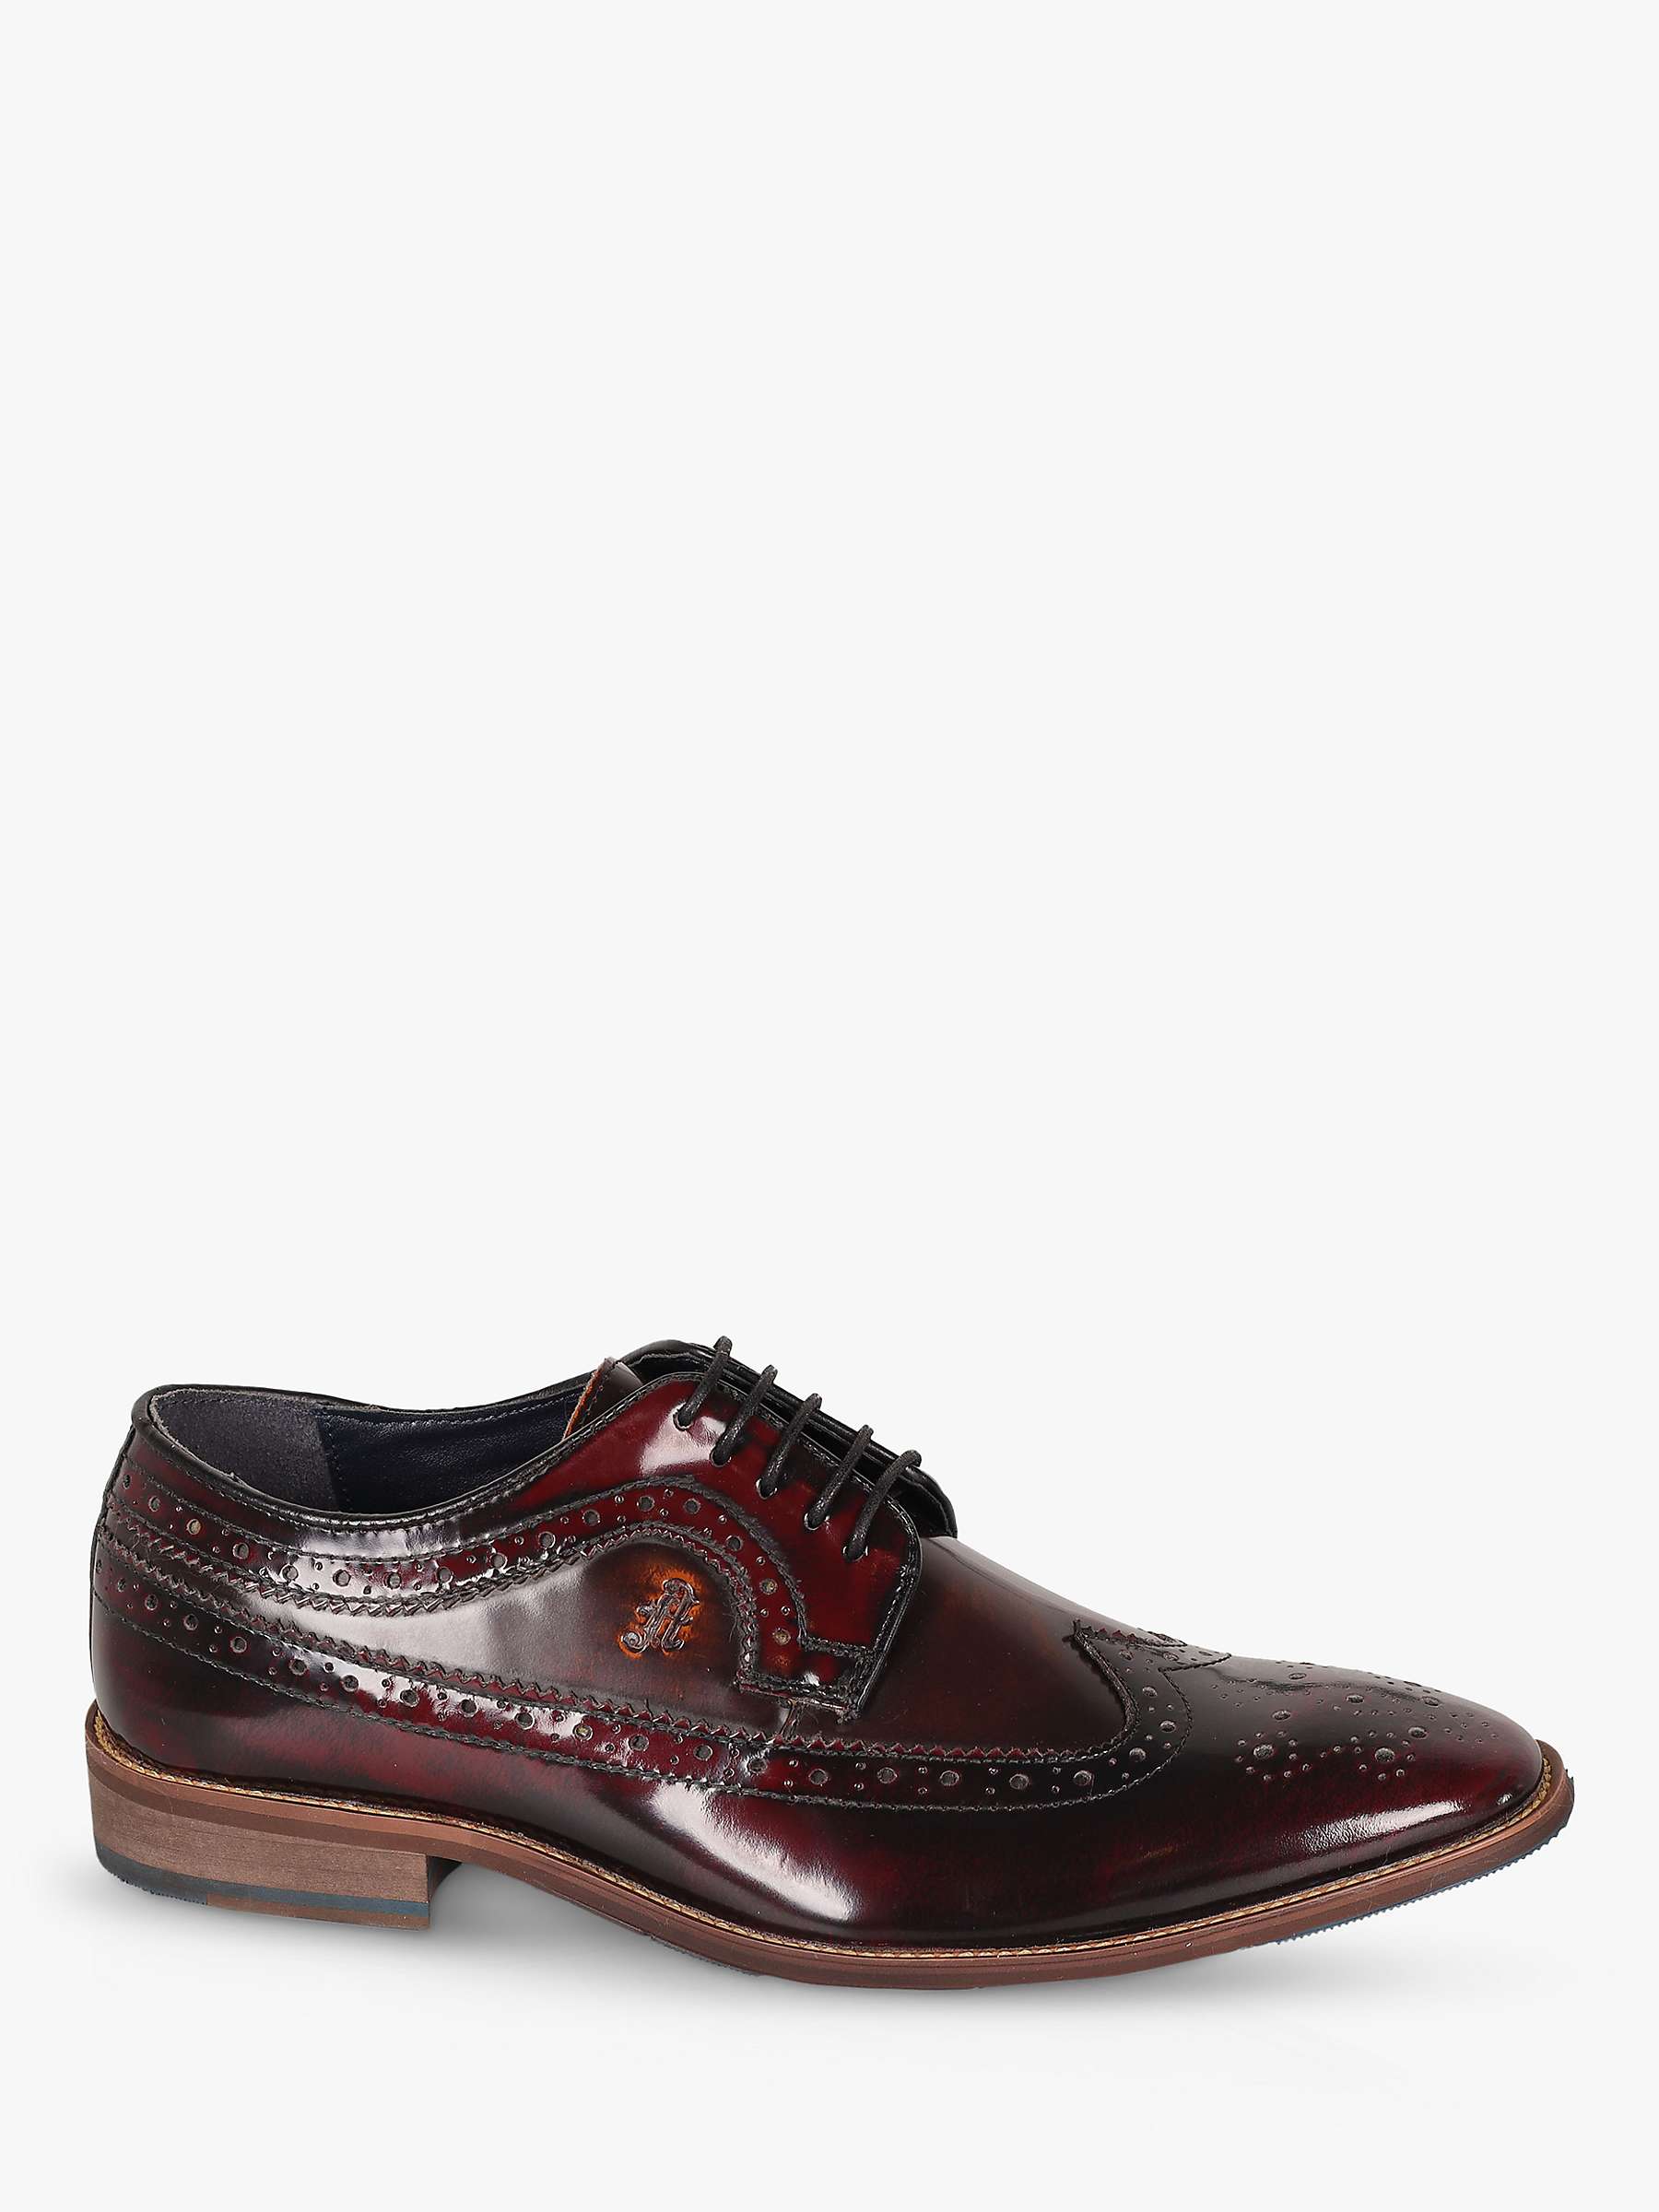 Buy Silver Street London Amen Collection Dublin Patent Leather Brogues, Oxblood Online at johnlewis.com